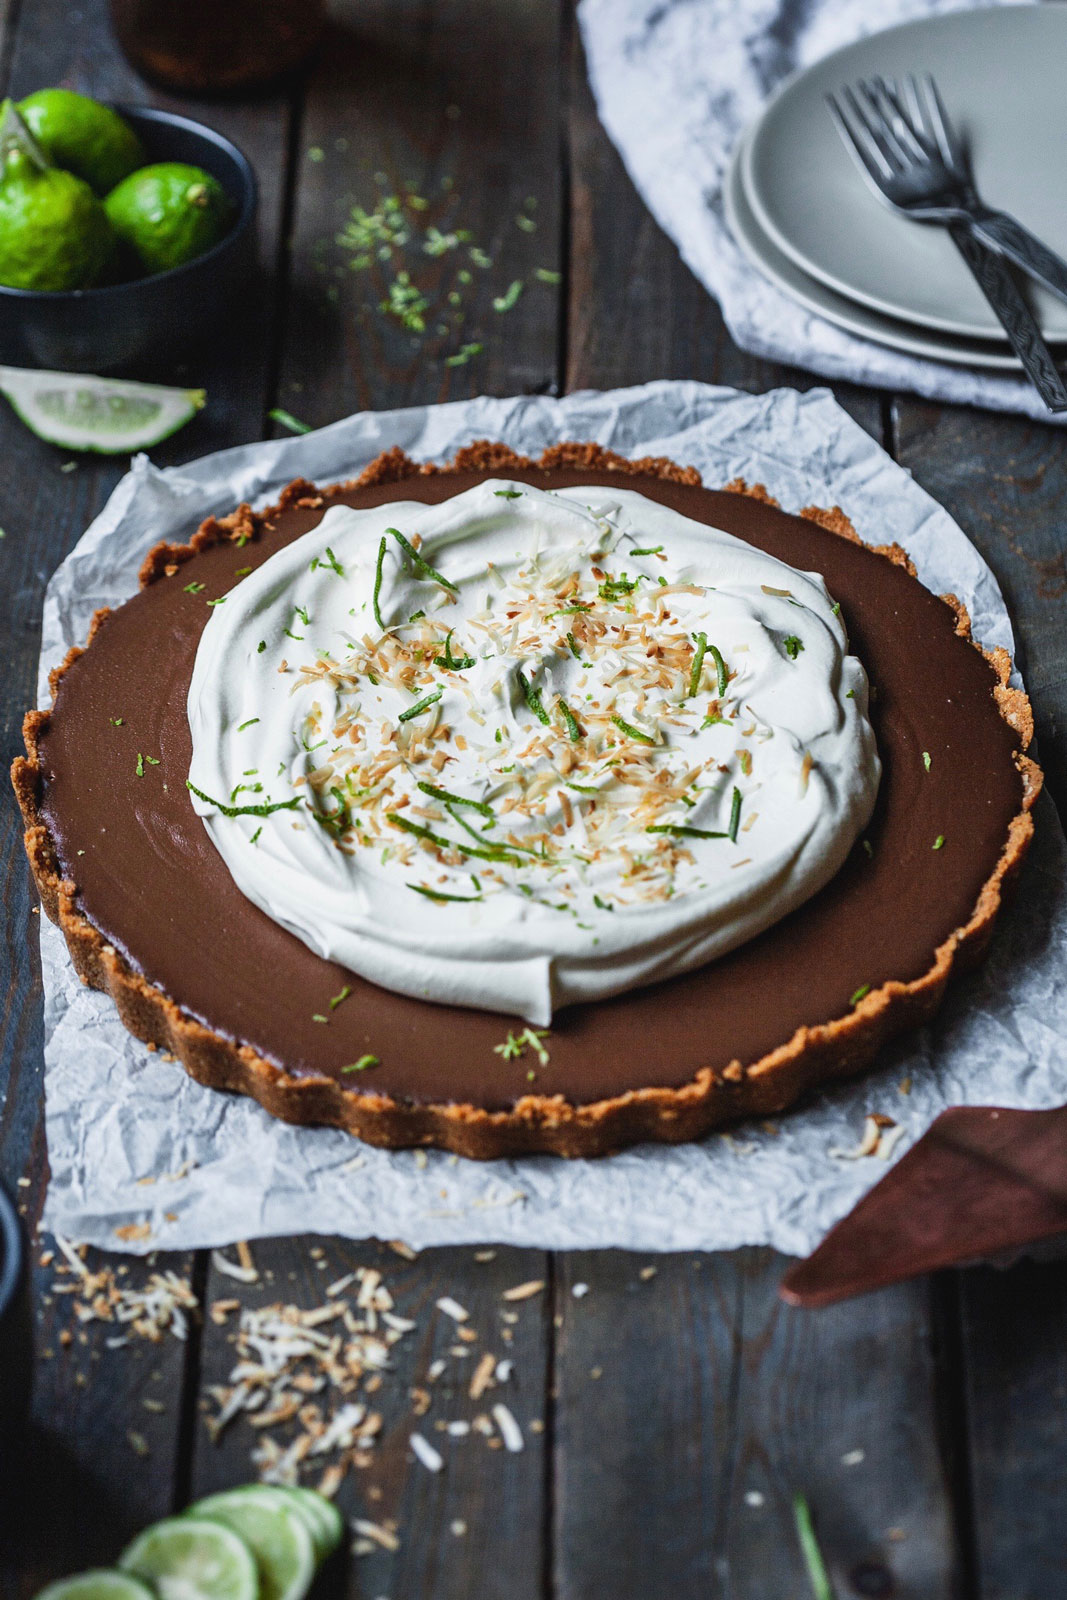 Chocolate Lime Tart With A Ginger Snap Crust